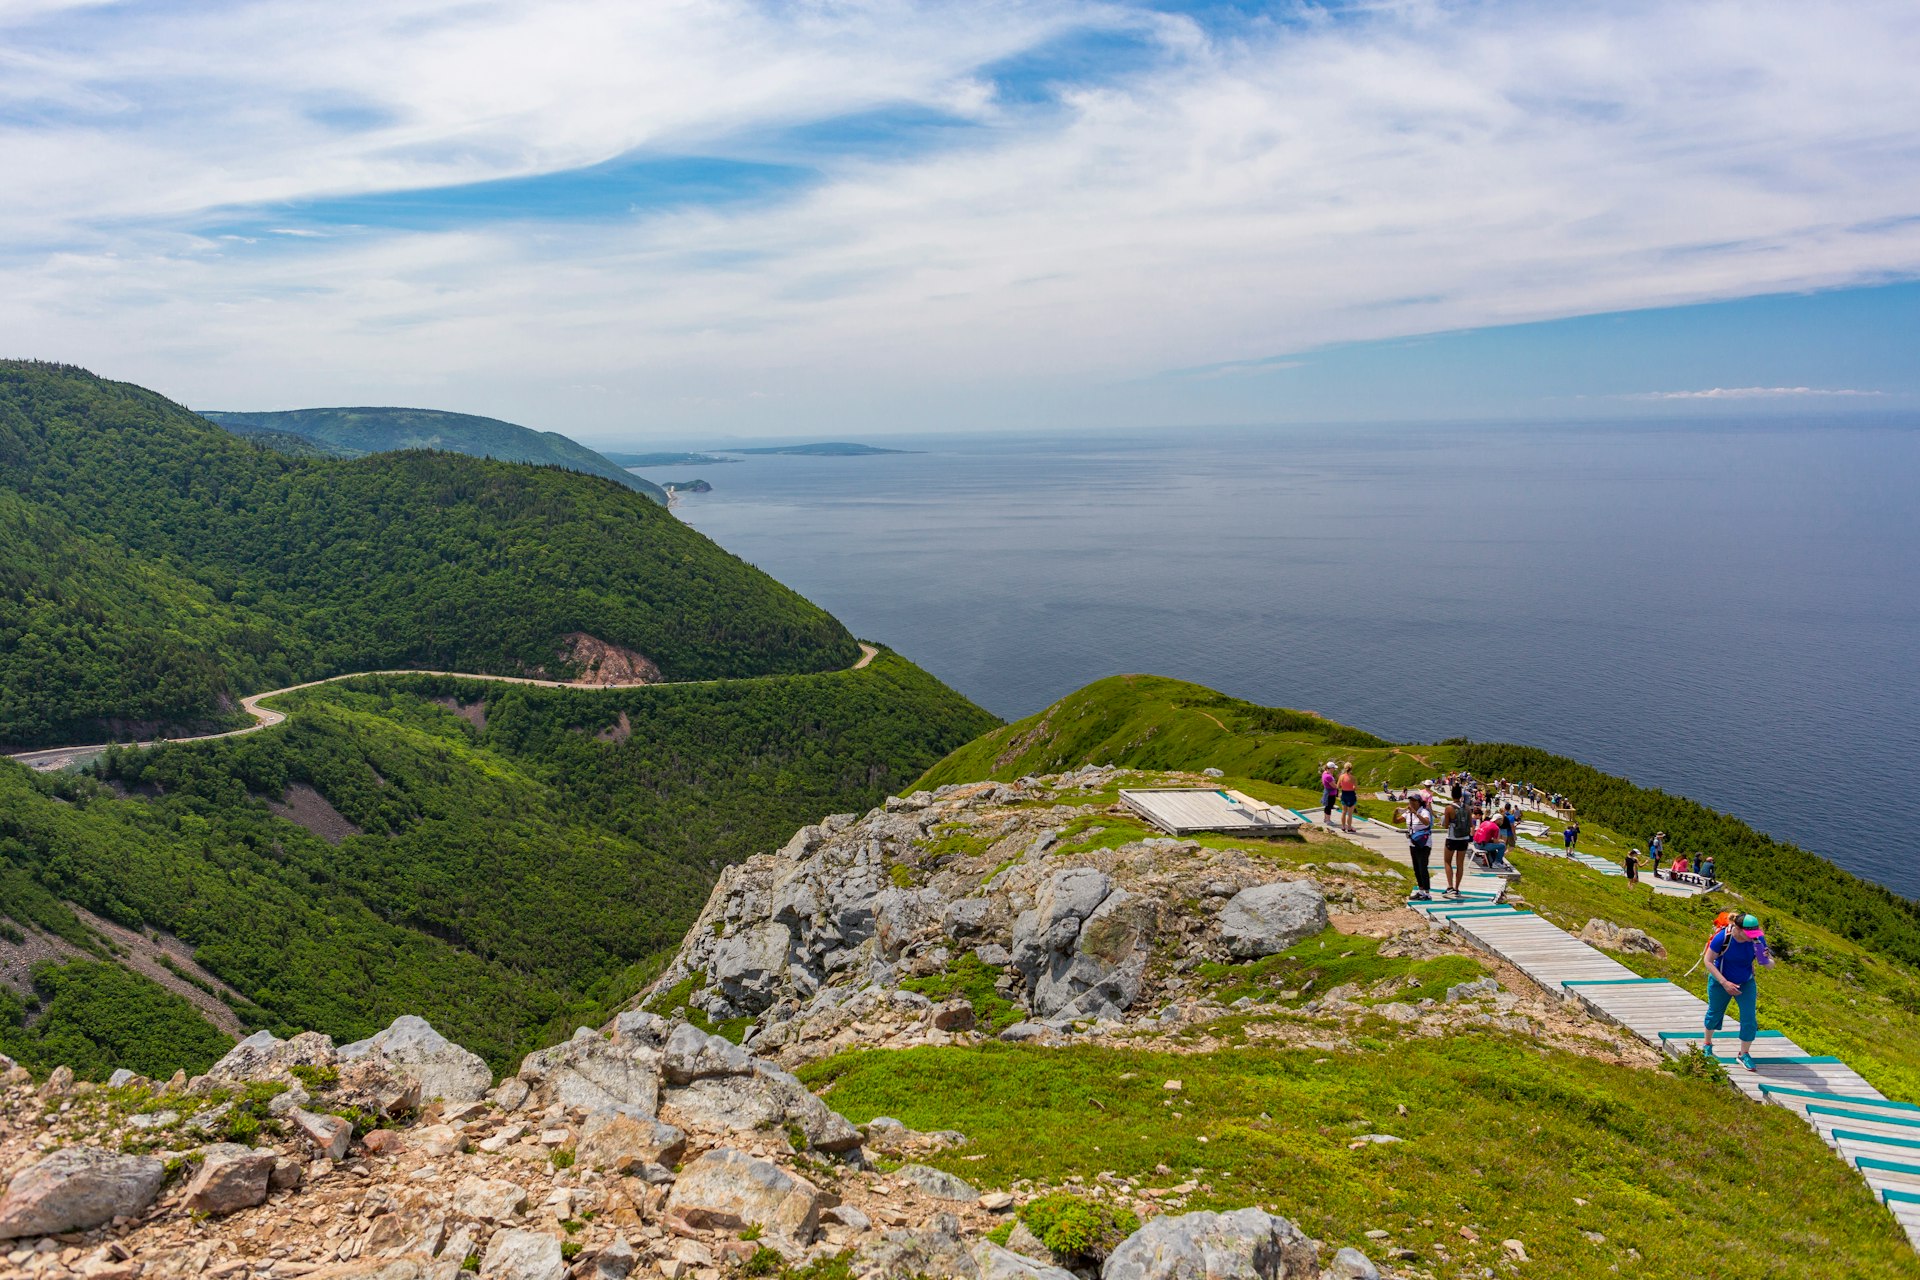 Hikers on the Skyline Trail in Cape Breton Highlands National Park, Canada